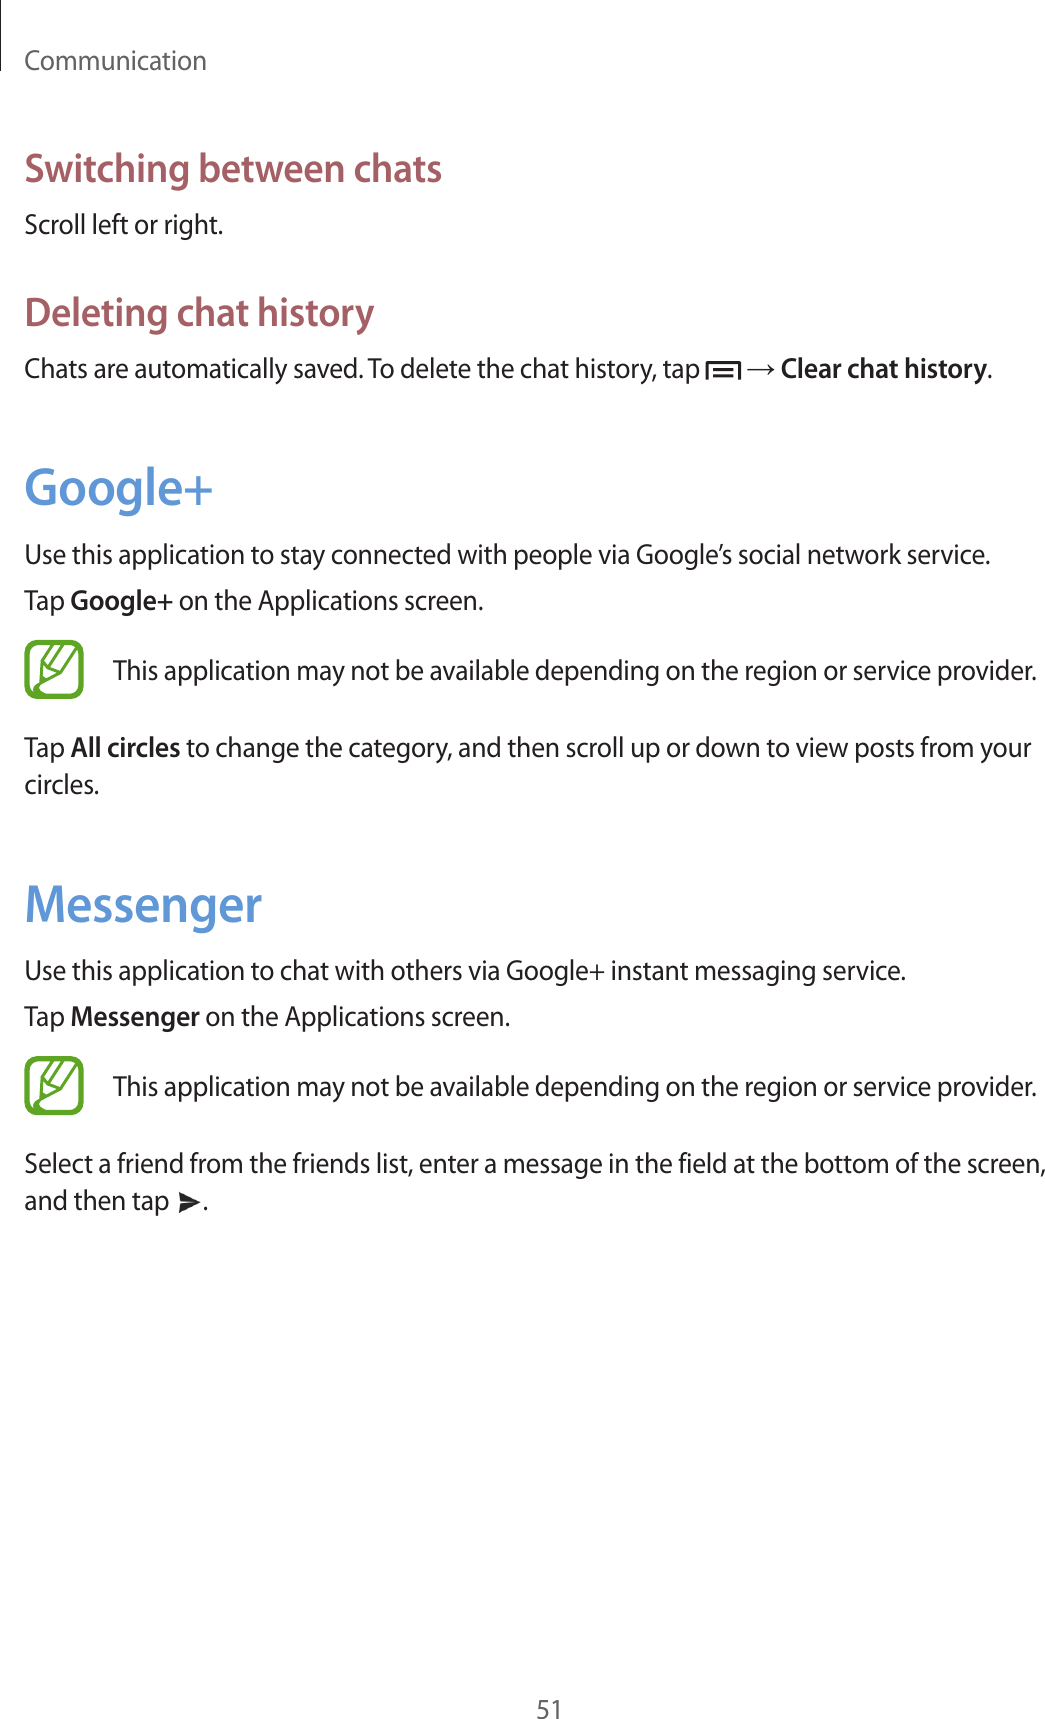 Communication51Switching between chatsScroll left or right.Deleting chat historyChats are automatically saved. To delete the chat history, tap   → Clear chat history.Google+Use this application to stay connected with people via Google’s social network service.Tap Google+ on the Applications screen.This application may not be available depending on the region or service provider.Tap All circles to change the category, and then scroll up or down to view posts from your circles.MessengerUse this application to chat with others via Google+ instant messaging service.Tap Messenger on the Applications screen.This application may not be available depending on the region or service provider.Select a friend from the friends list, enter a message in the field at the bottom of the screen, and then tap  .